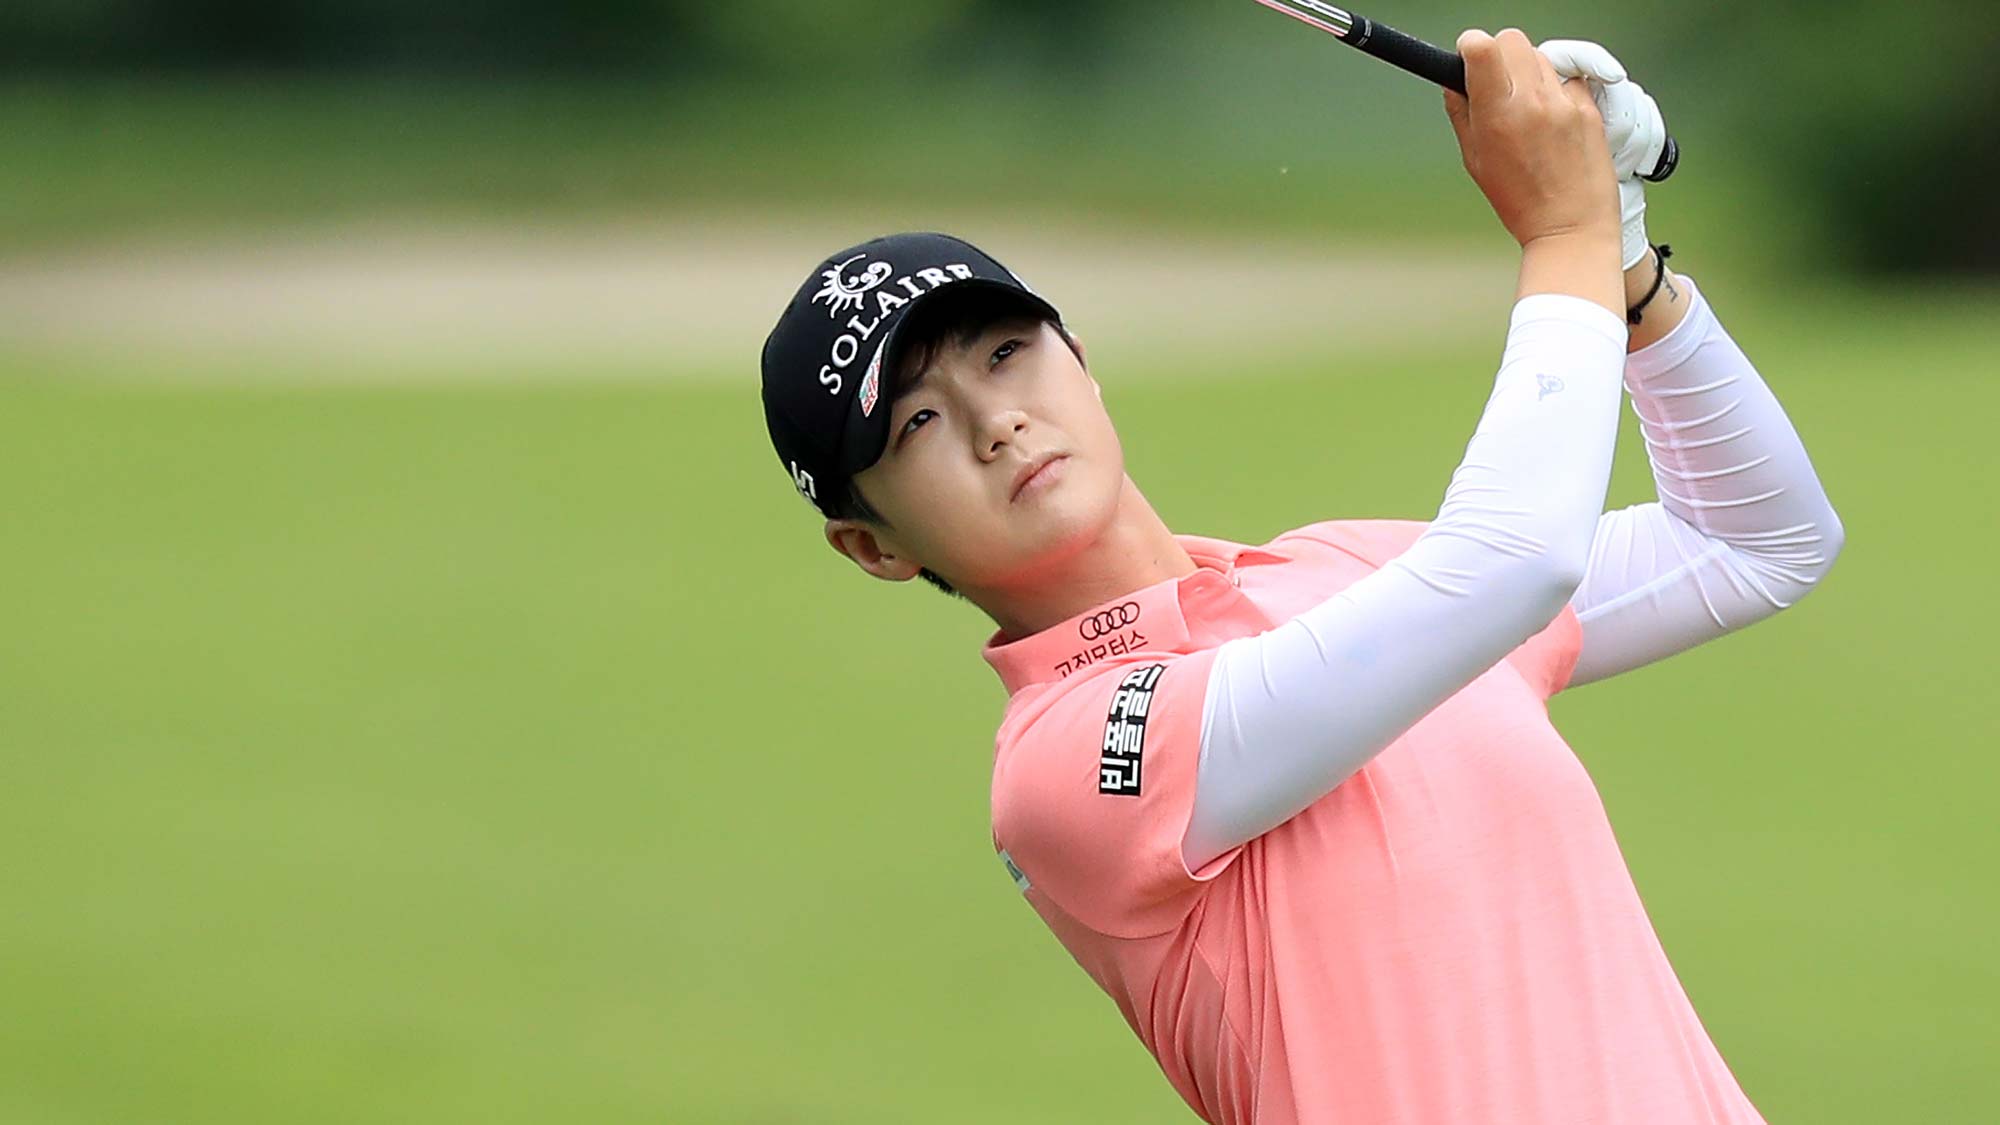 Sung Hyun Park of South Korea plays her second shot on the par 4, sixth hole during the third round of the 2019 Women's PGA Championship